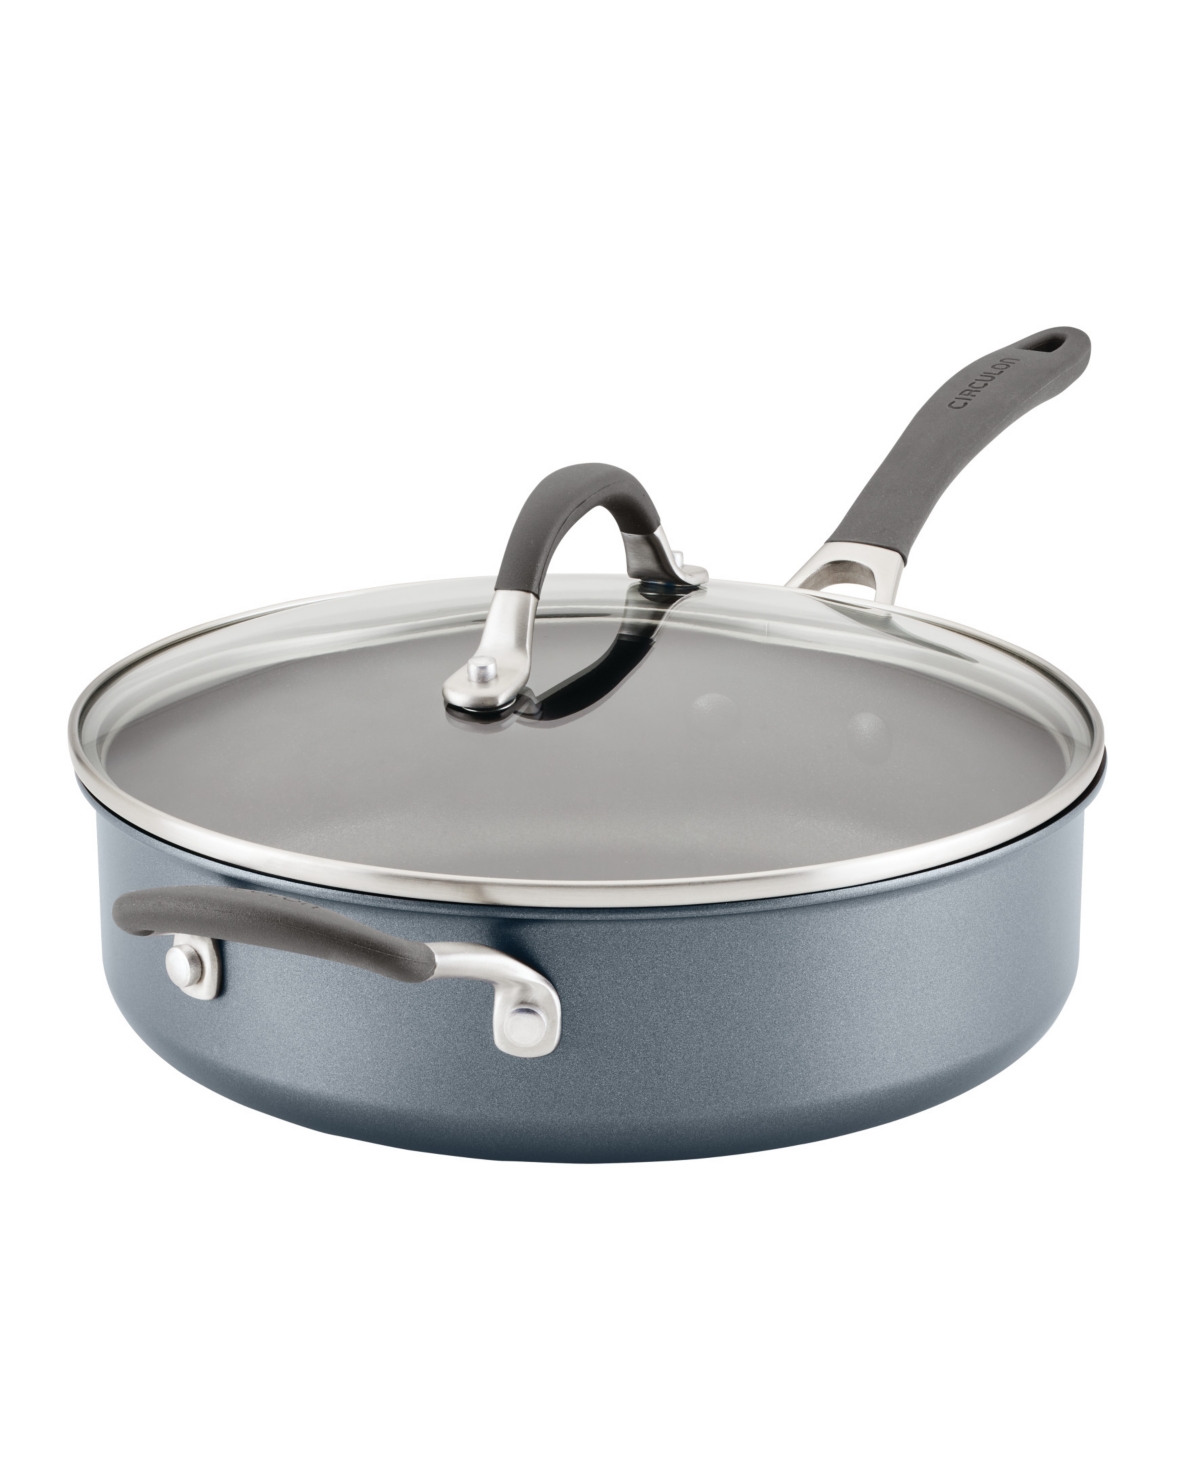 Circulon A1 Series With Scratchdefense Technology Aluminum 5-quart Nonstick Induction Saute Pan With Lid In Graphite